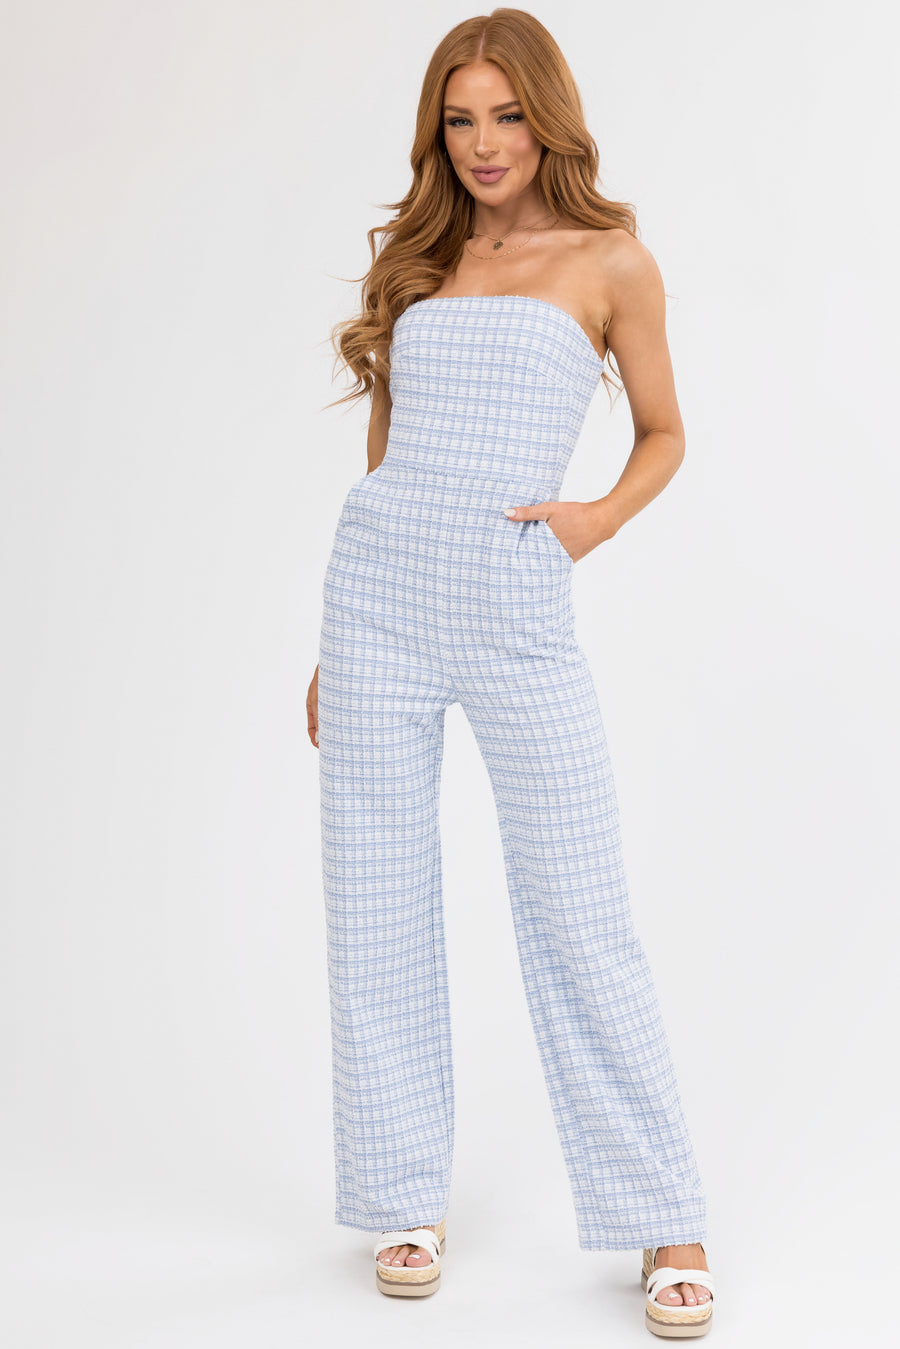 Sky Blue and White Tweed Plaid Strapless Jumpsuit